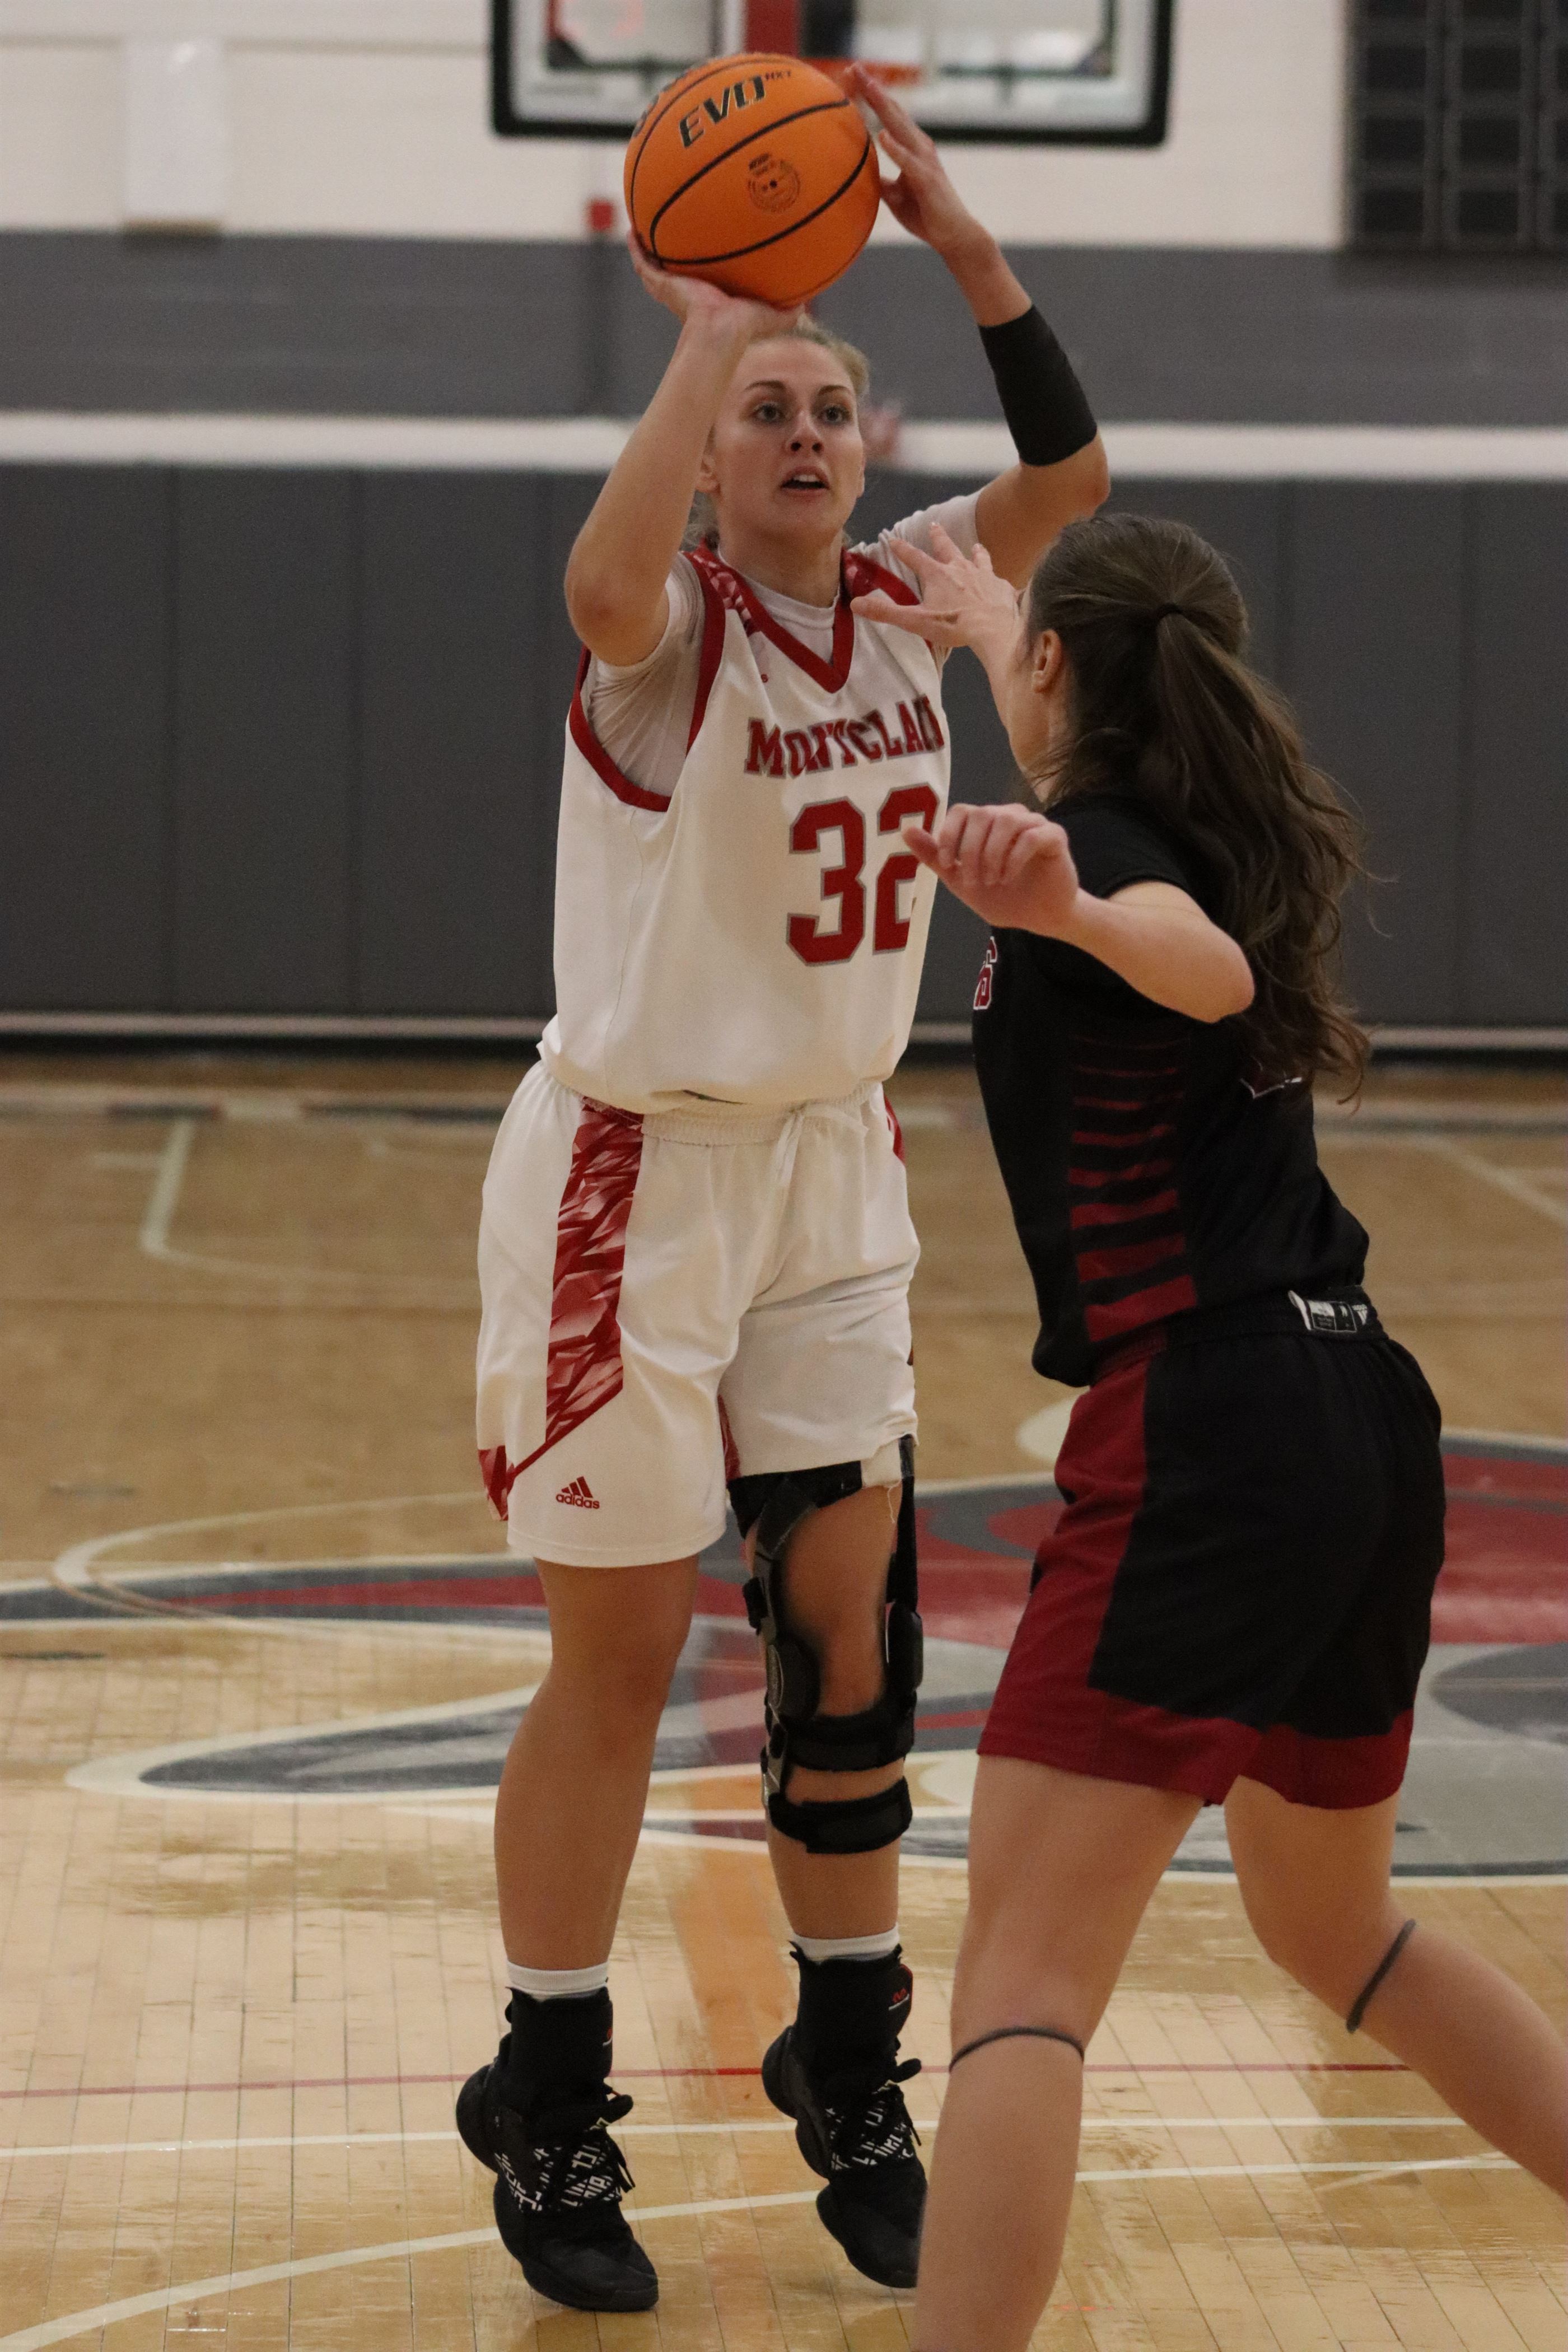 Teresa Wolak takes a shot with a defender's hand right towards her. Trevor Giesberg | The Montclarion